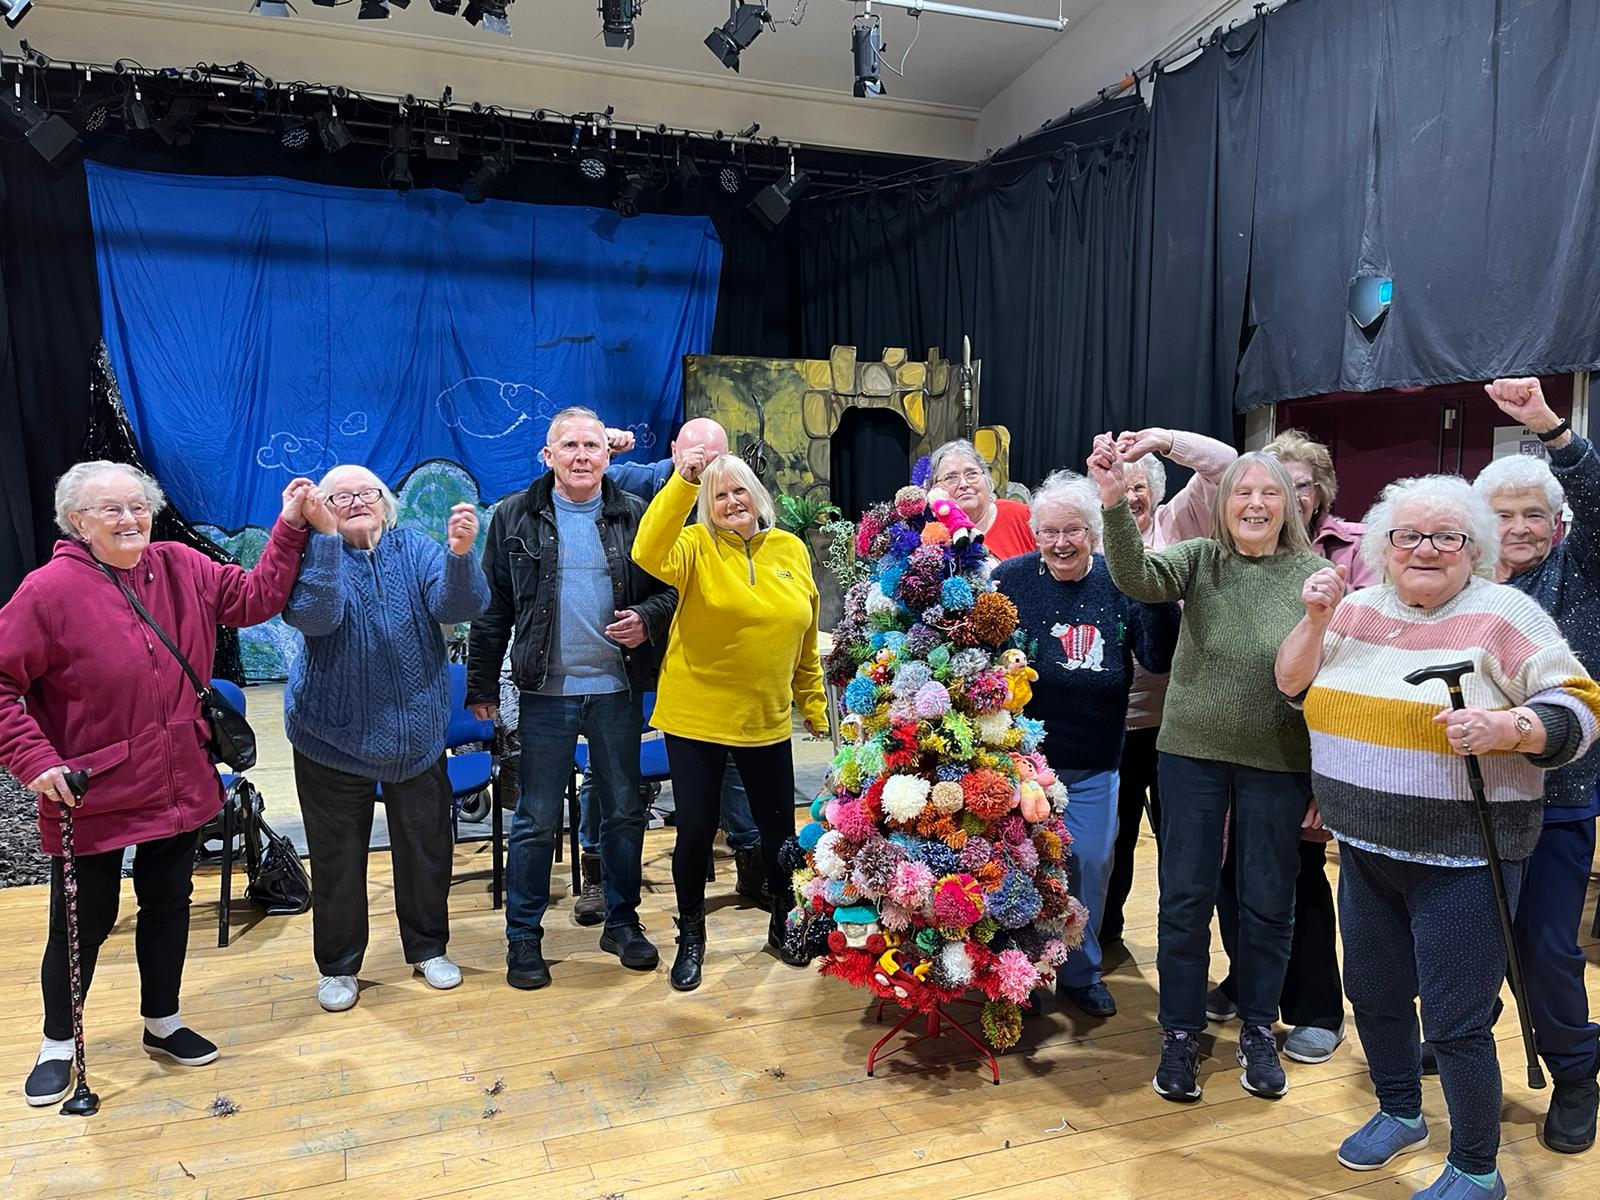 Eleven members of our over 55s group stand around a Christmas tree made of brightly coloured pompoms, cheering.